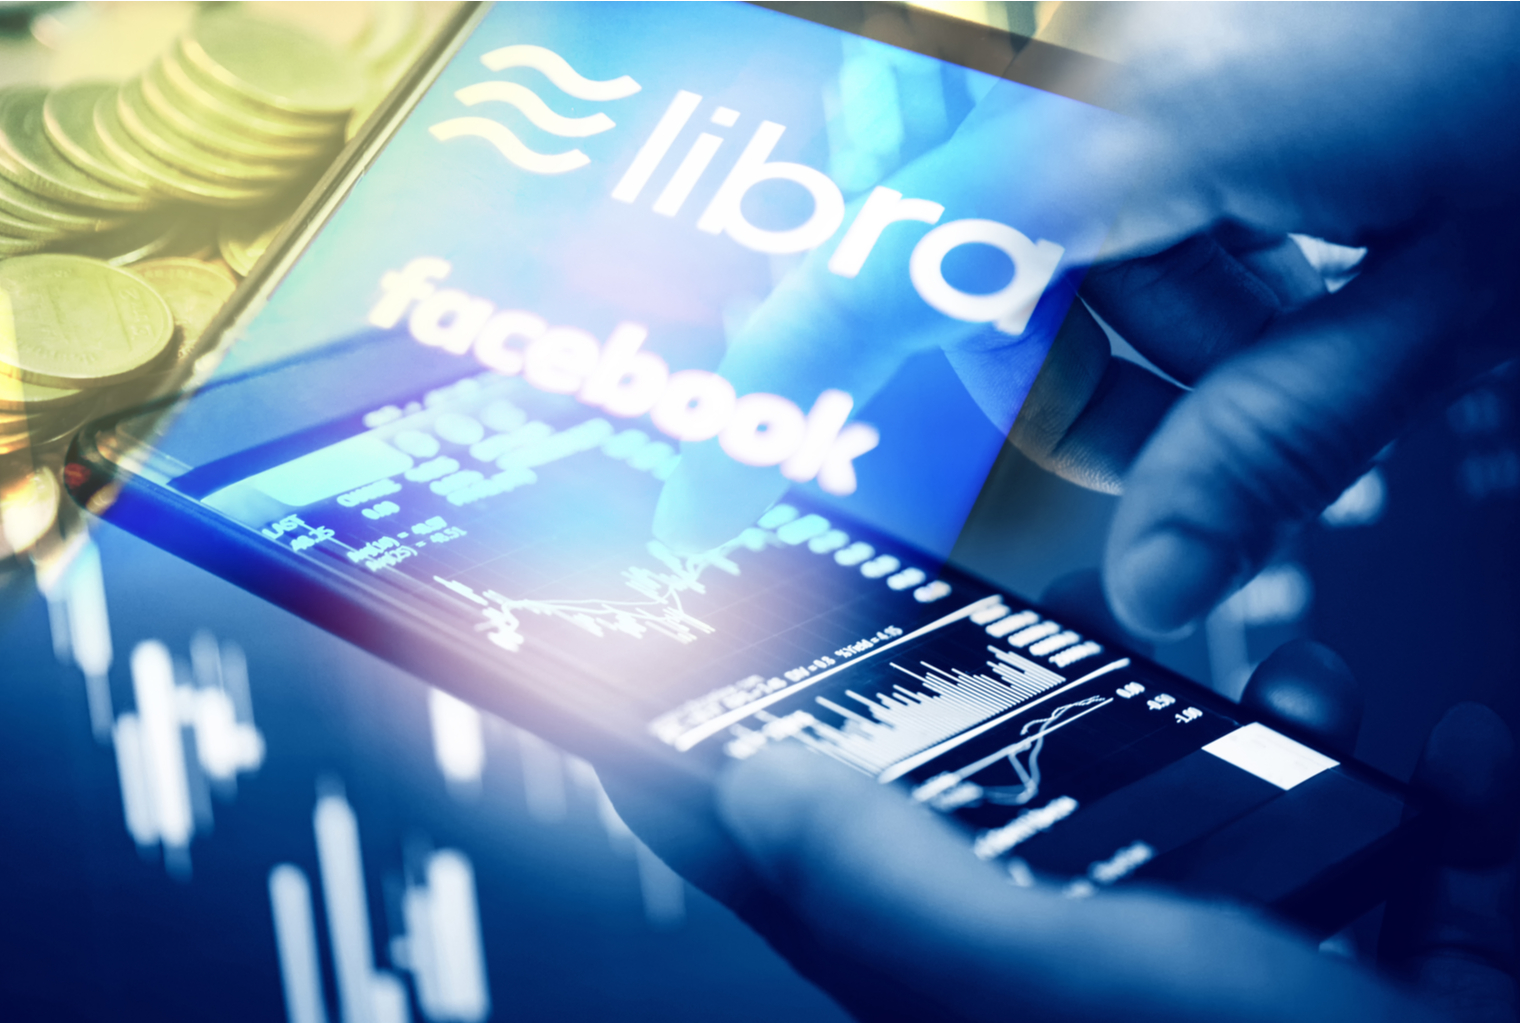 Bitcoin’s Scaling Problems Forced Facebook to Launch Libra